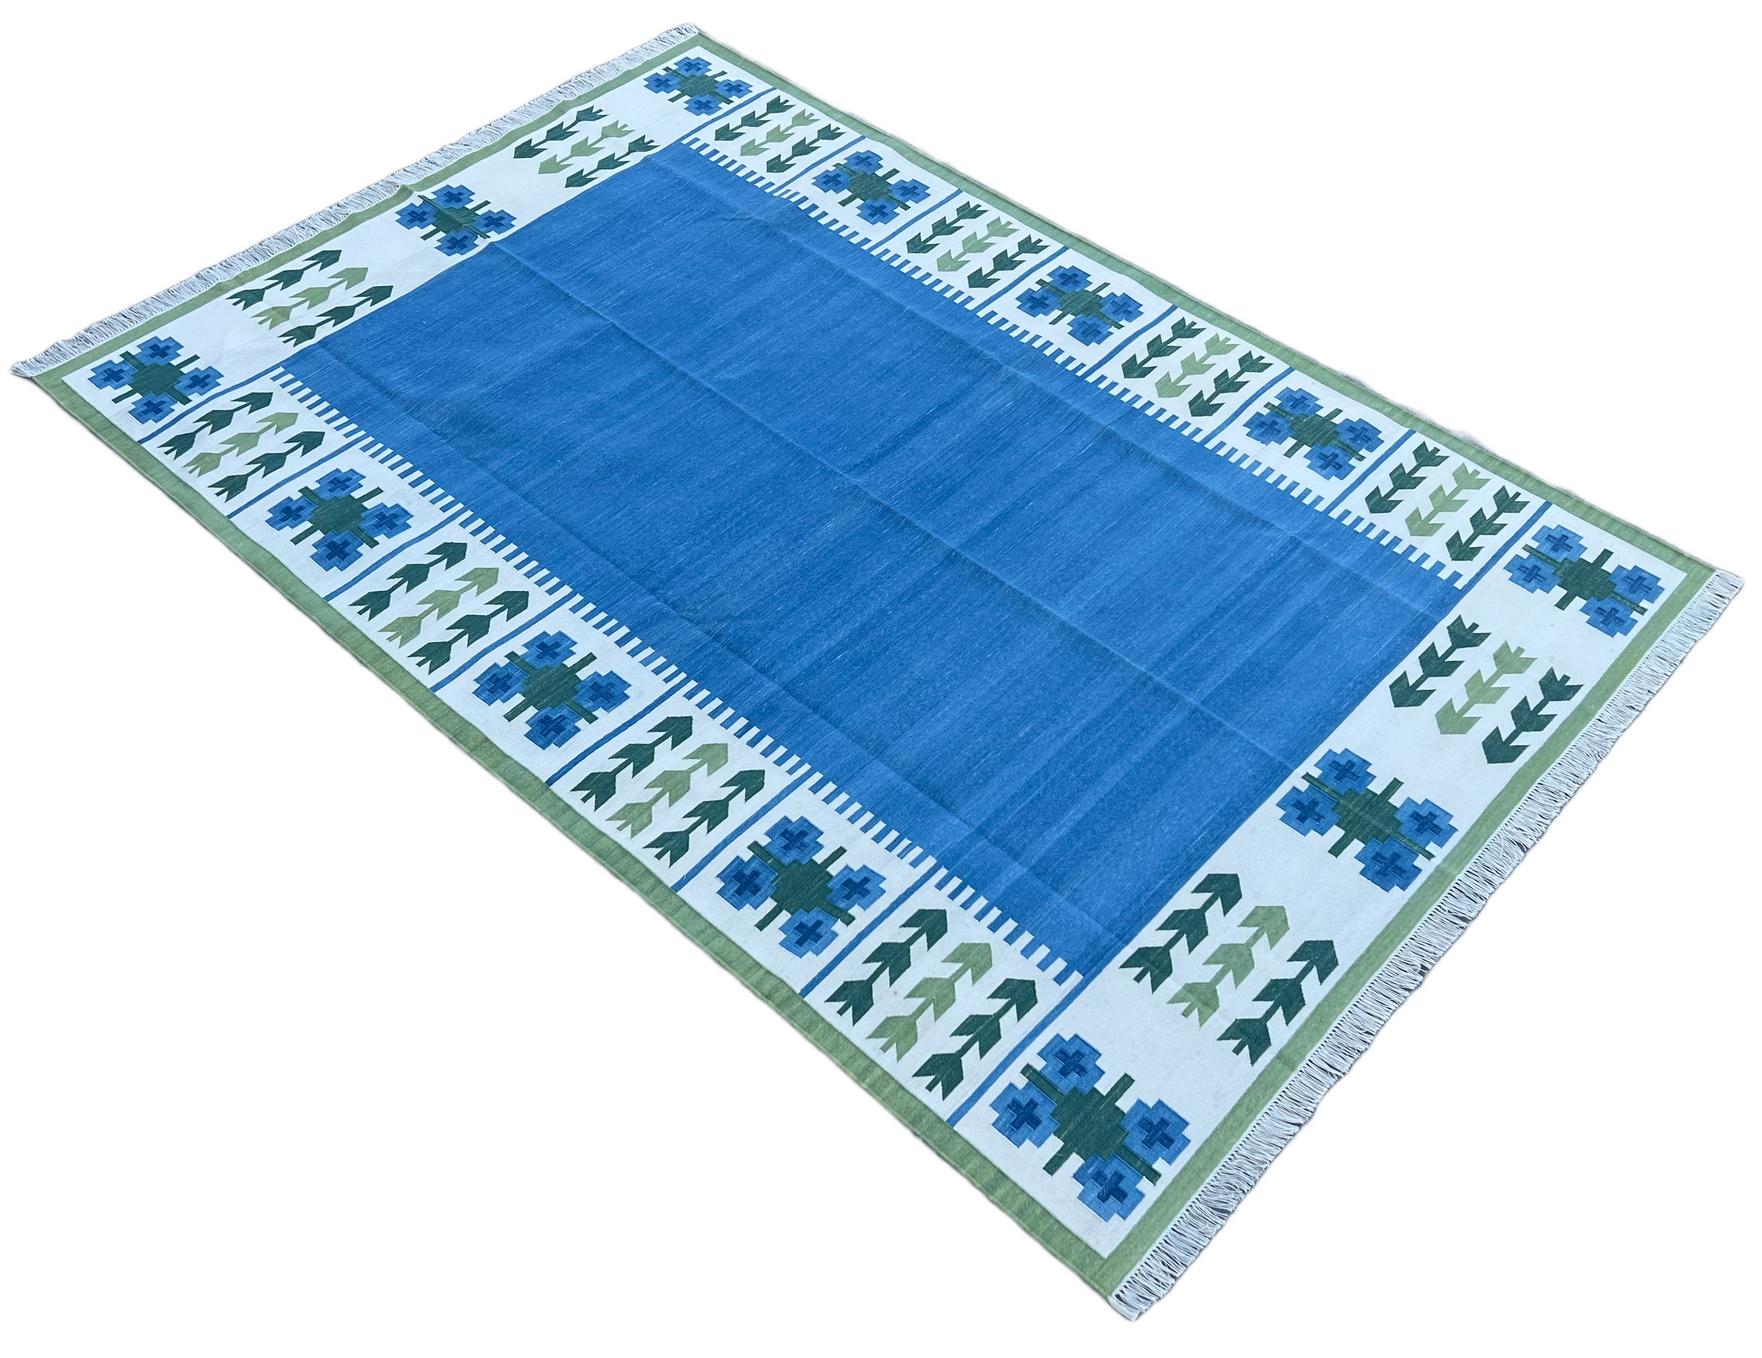 Cotton Natural Vegetable Dyed Blue And Green Leaf Patterned Indian Rug-6'x9'
These special flat-weave dhurries are hand-woven with 15 ply 100% cotton yarn. Due to the special manufacturing techniques used to create our rugs, the size and color of